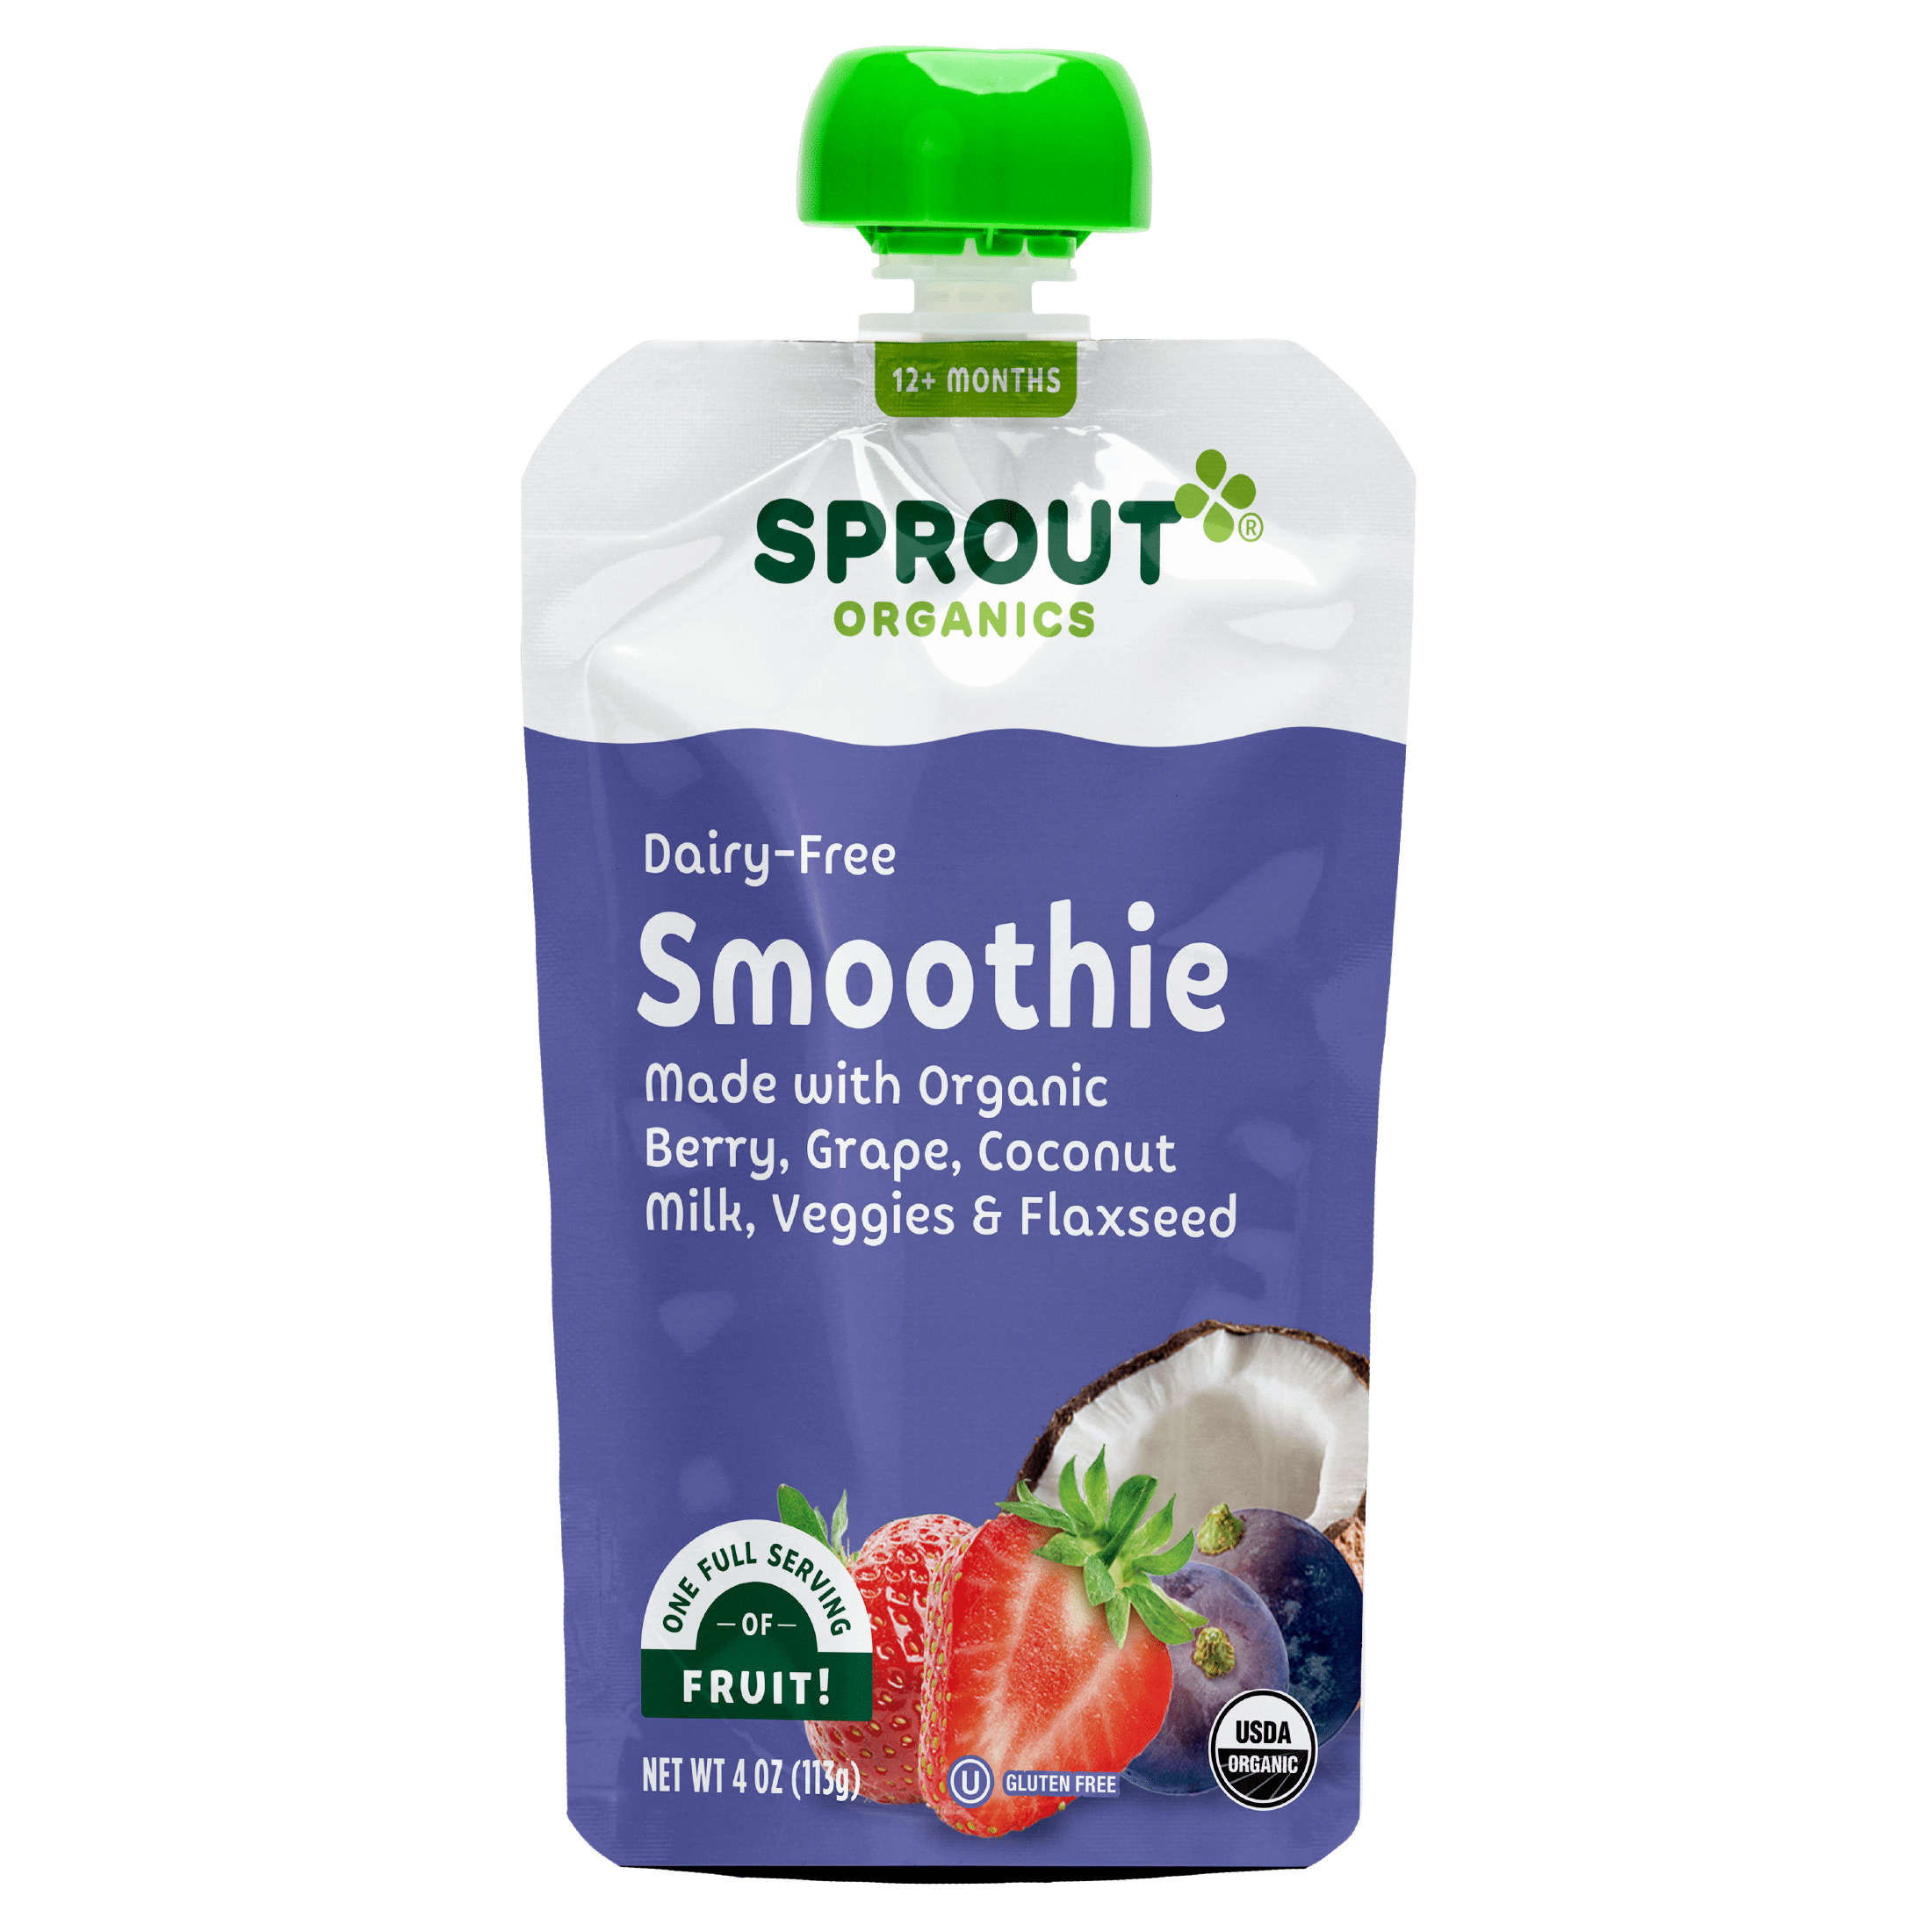 Organic Coconut Smoothie: Dairy-Free Smoothie Options